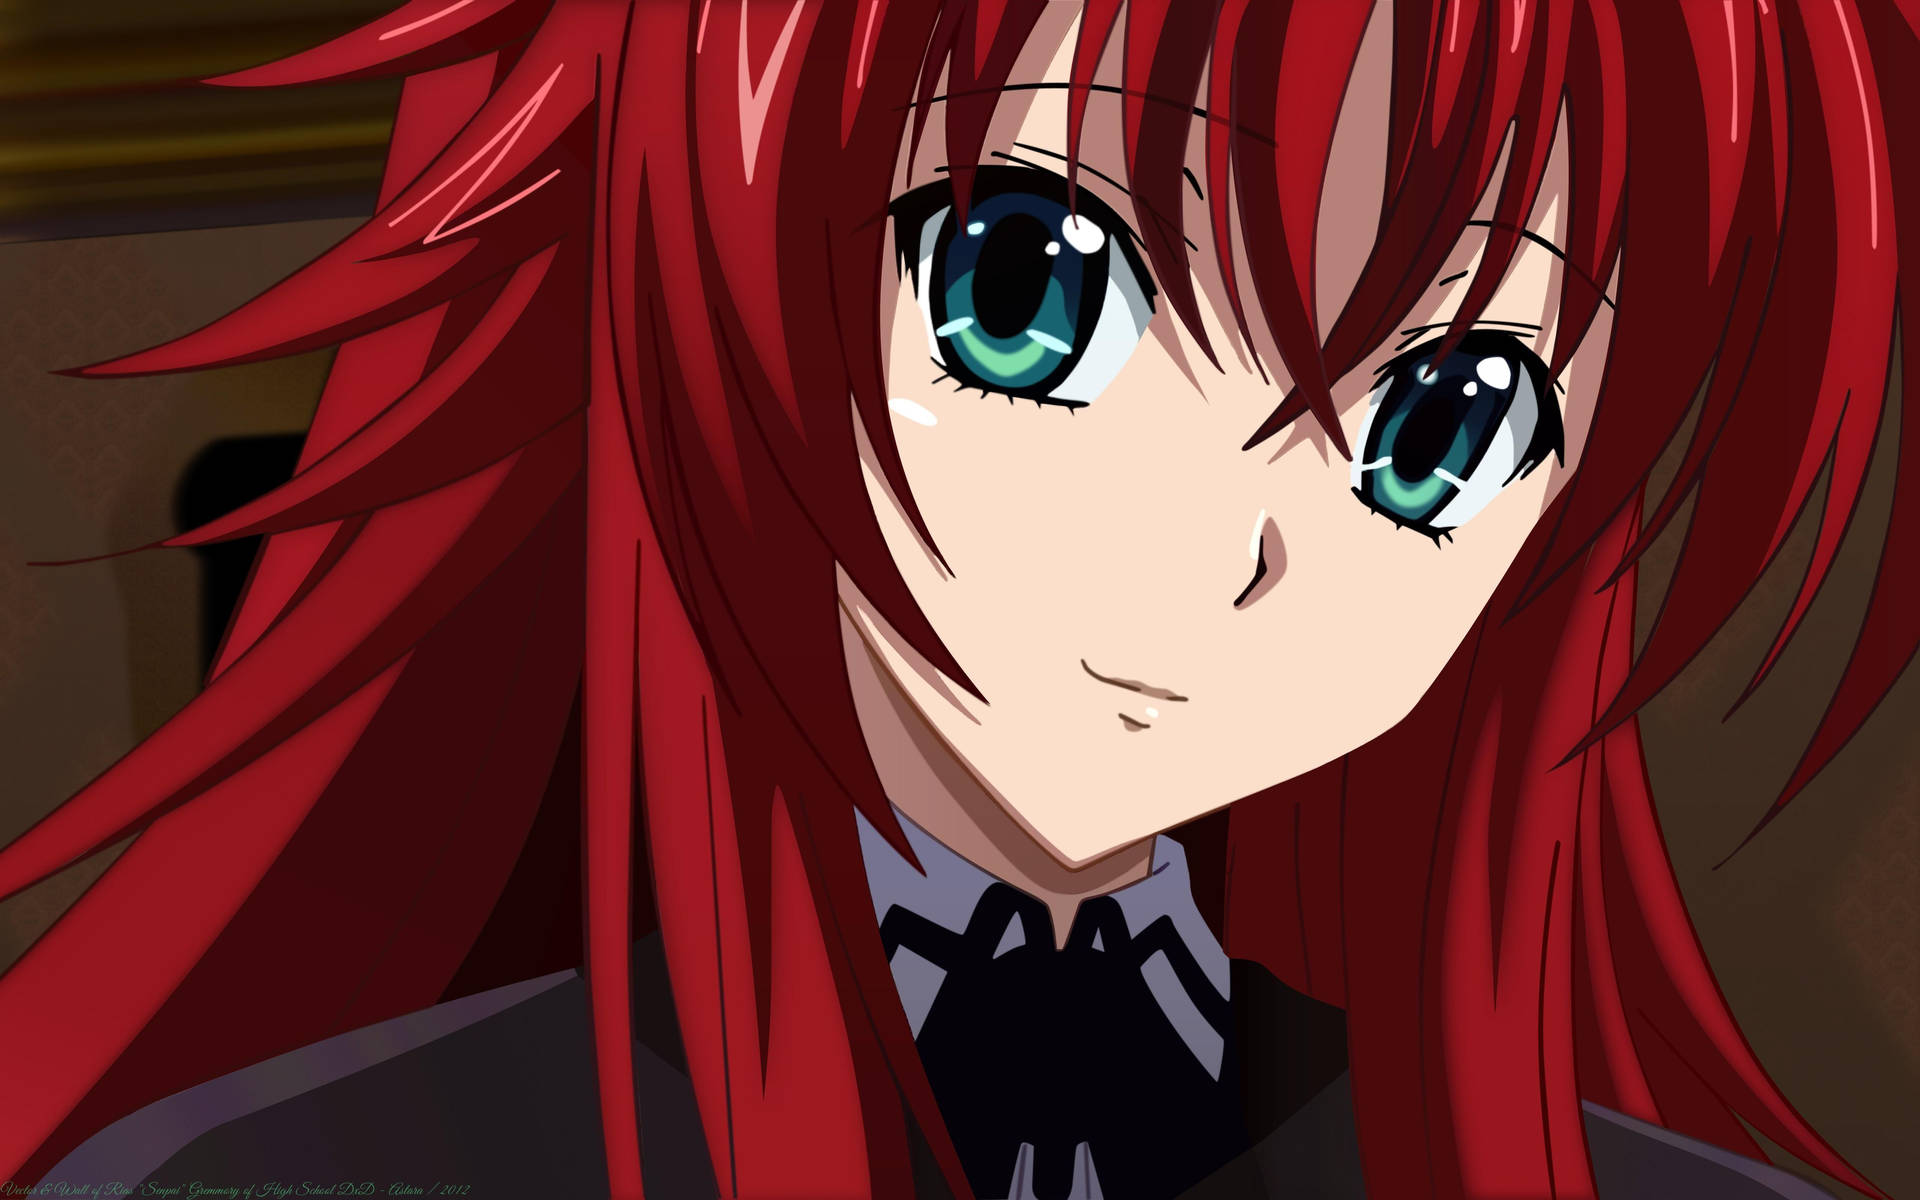 Follow Rias Gremory on her quest in Highschool DxD. Wallpaper